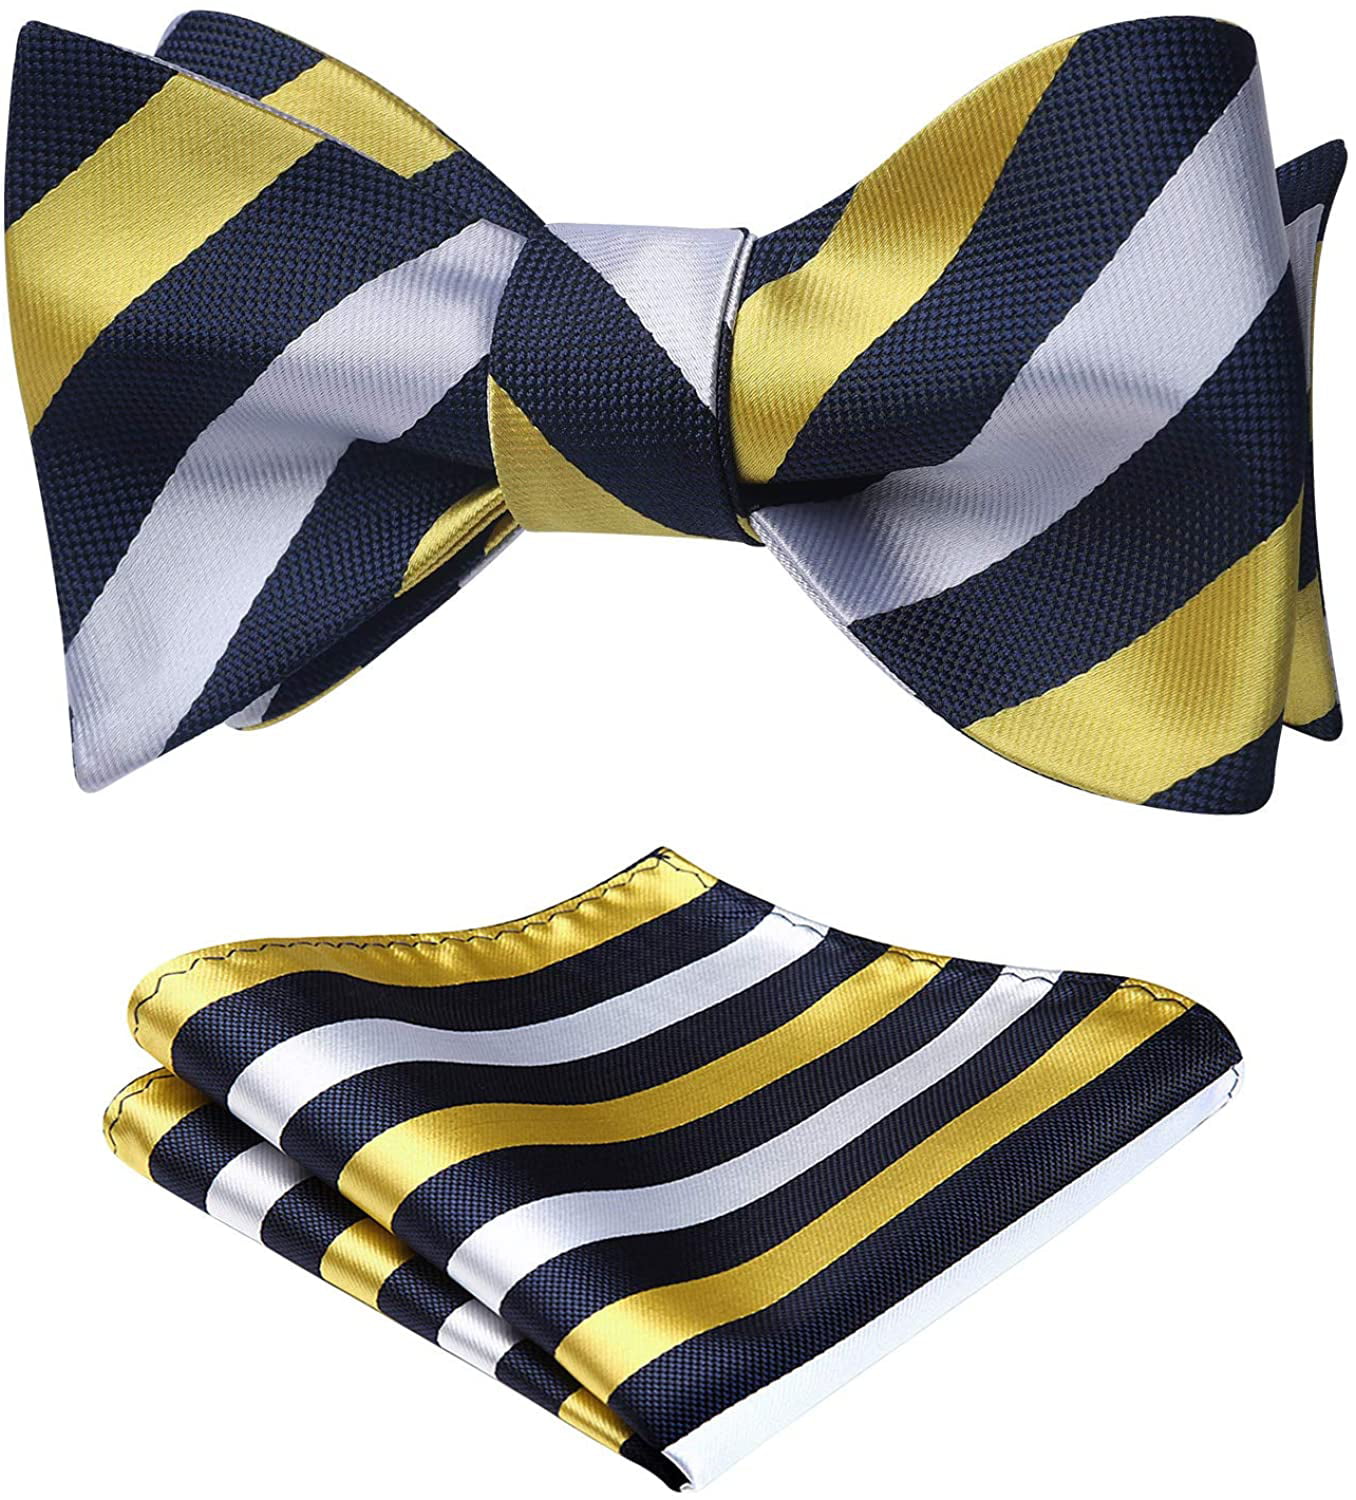 HISDERN Bow Ties for Men Bowties and Pocket Square Set Classic Funny Plaid Stripe Dot Bow Tie for Tuxedo Wedding Party 